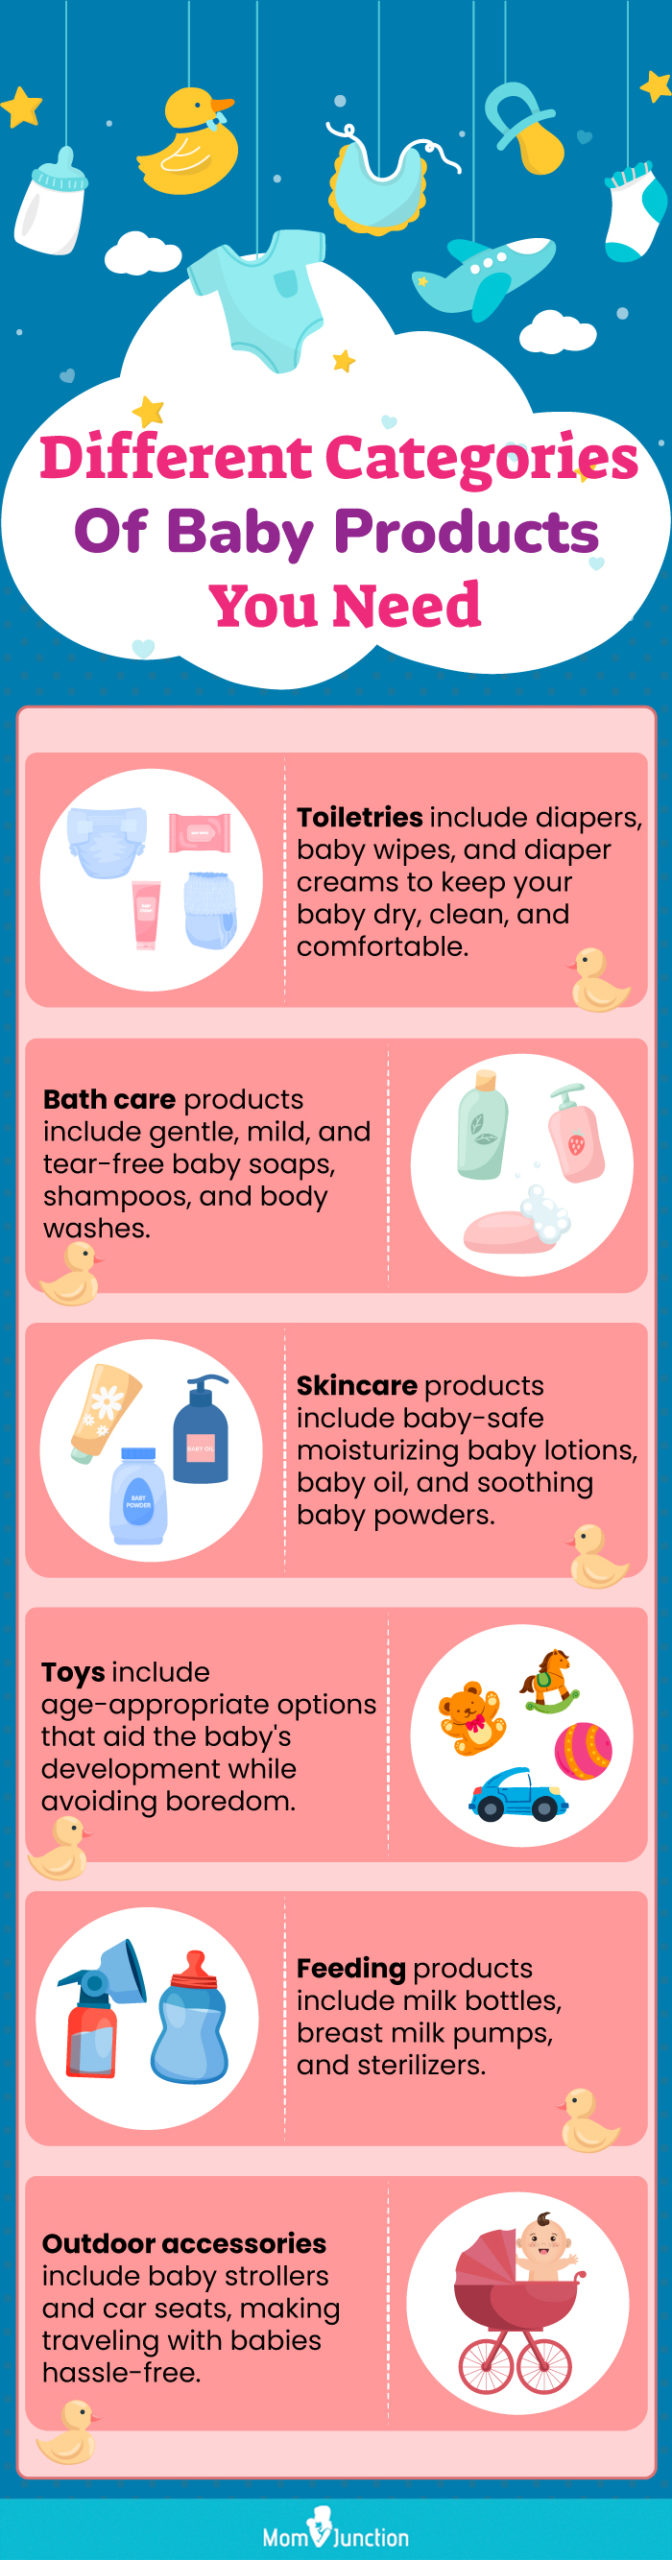 Different Categories Of Baby Products You Need (infographic)